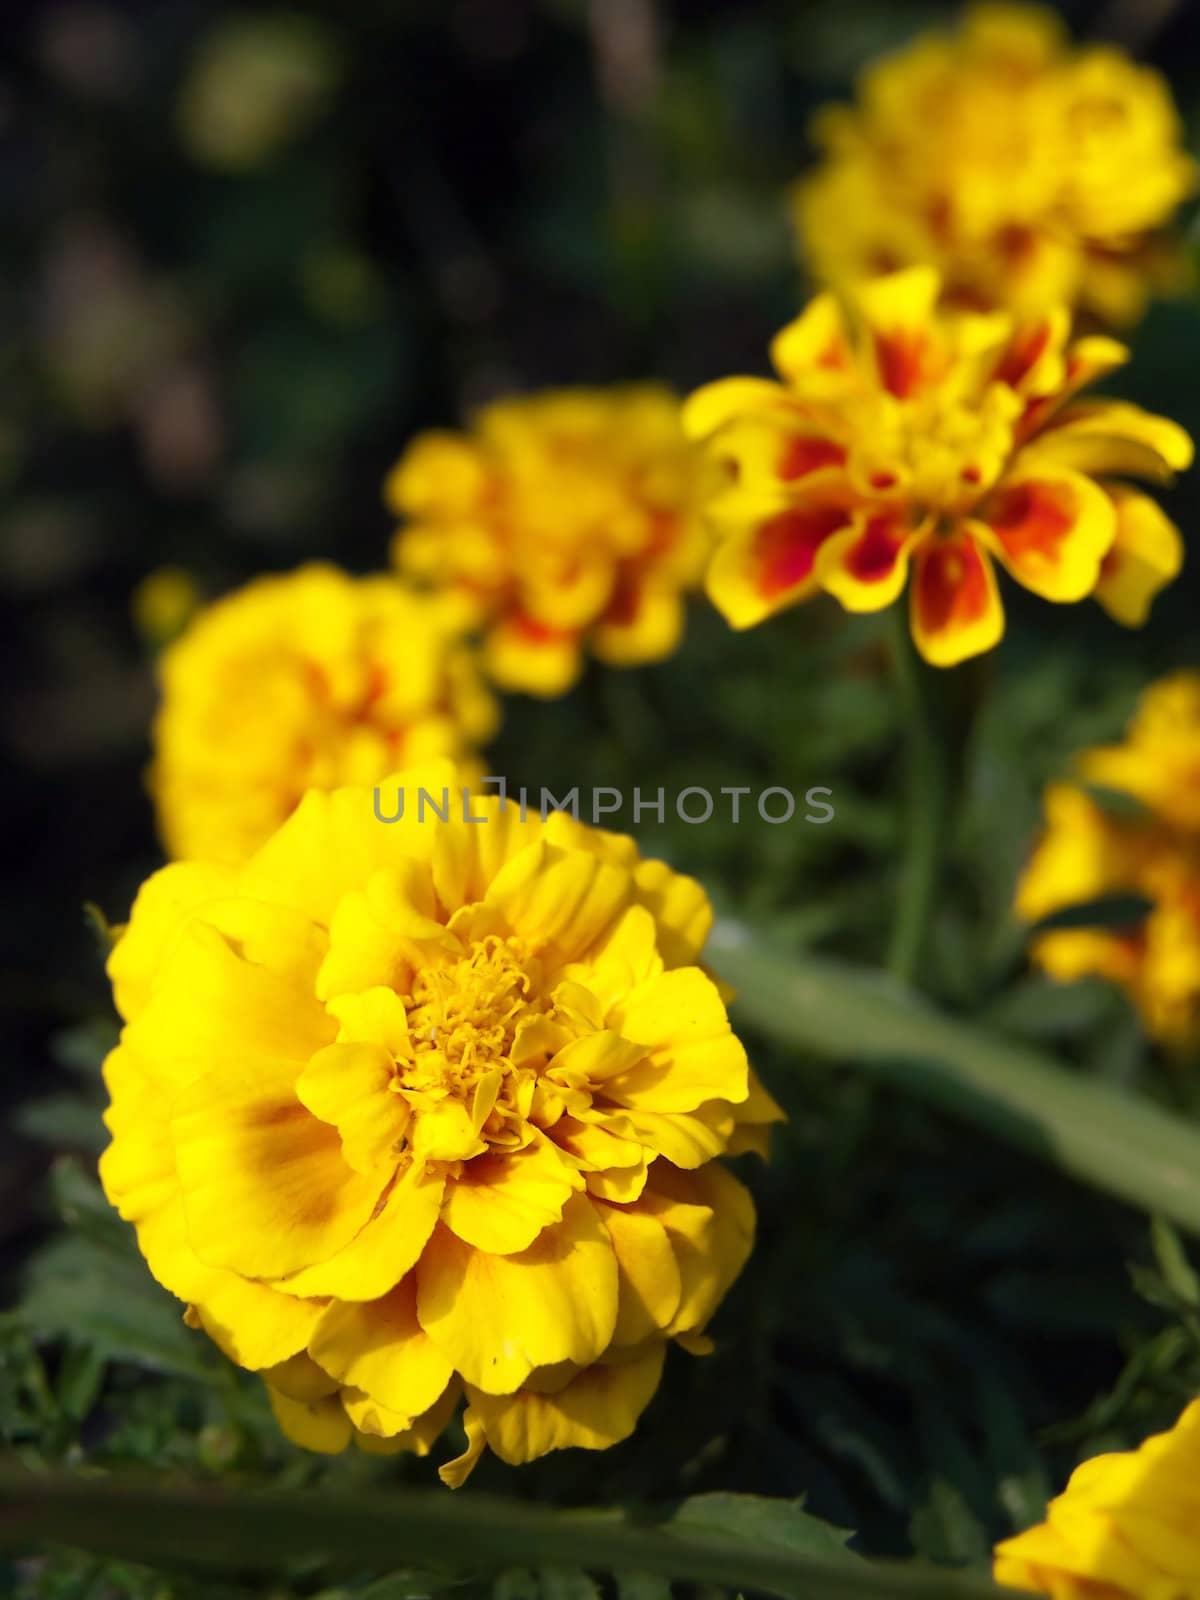 French marigold flowers by Exsodus